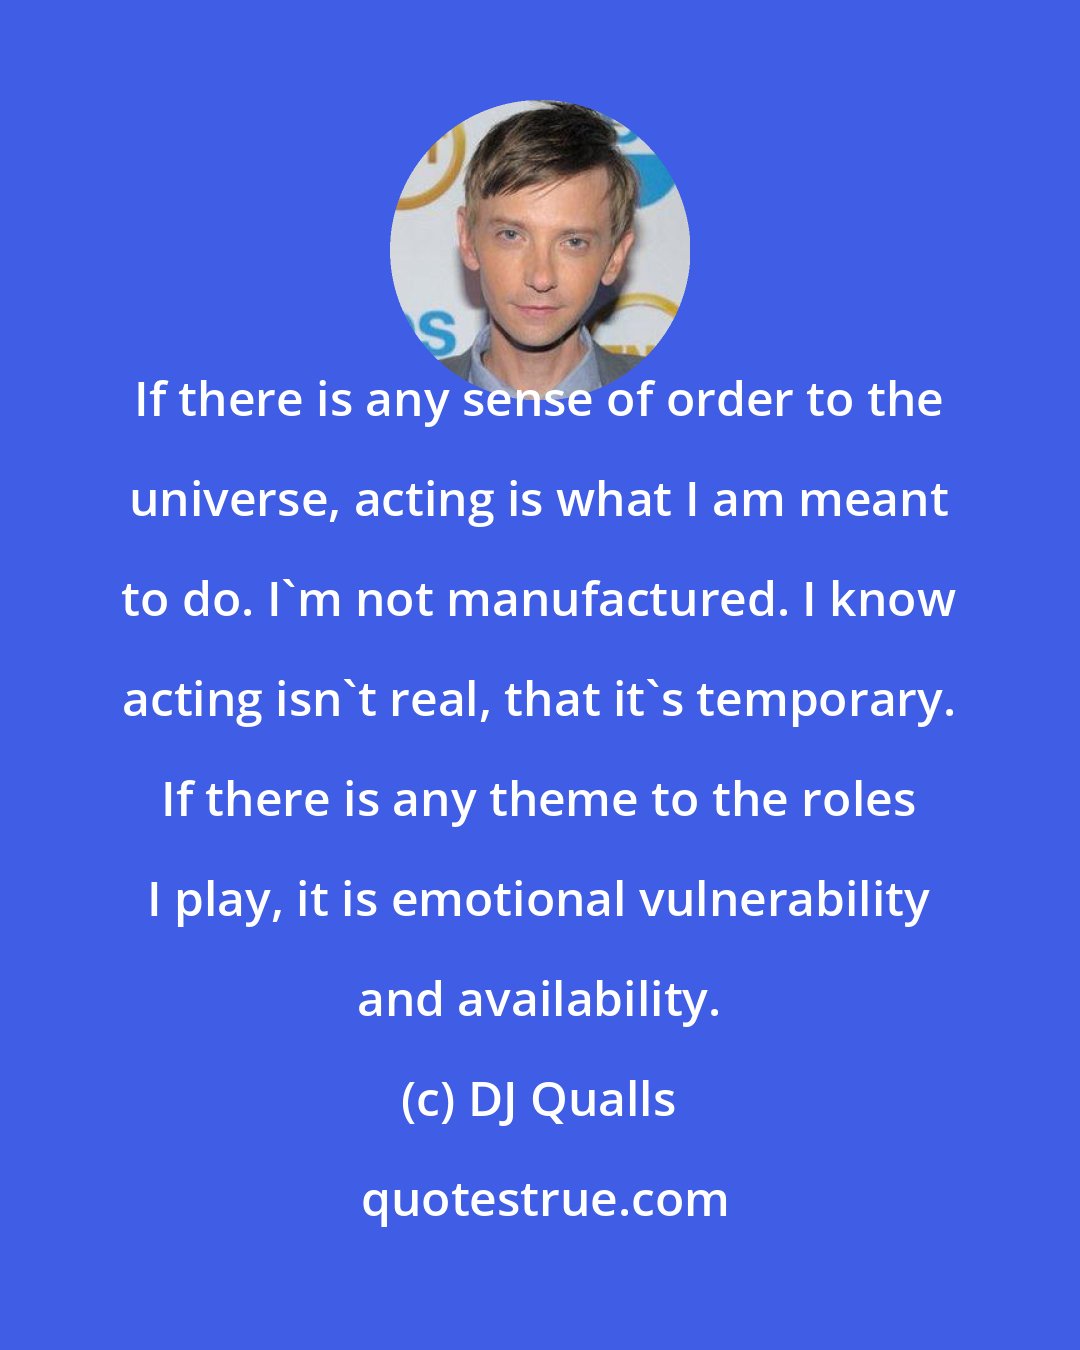 DJ Qualls: If there is any sense of order to the universe, acting is what I am meant to do. I'm not manufactured. I know acting isn't real, that it's temporary. If there is any theme to the roles I play, it is emotional vulnerability and availability.